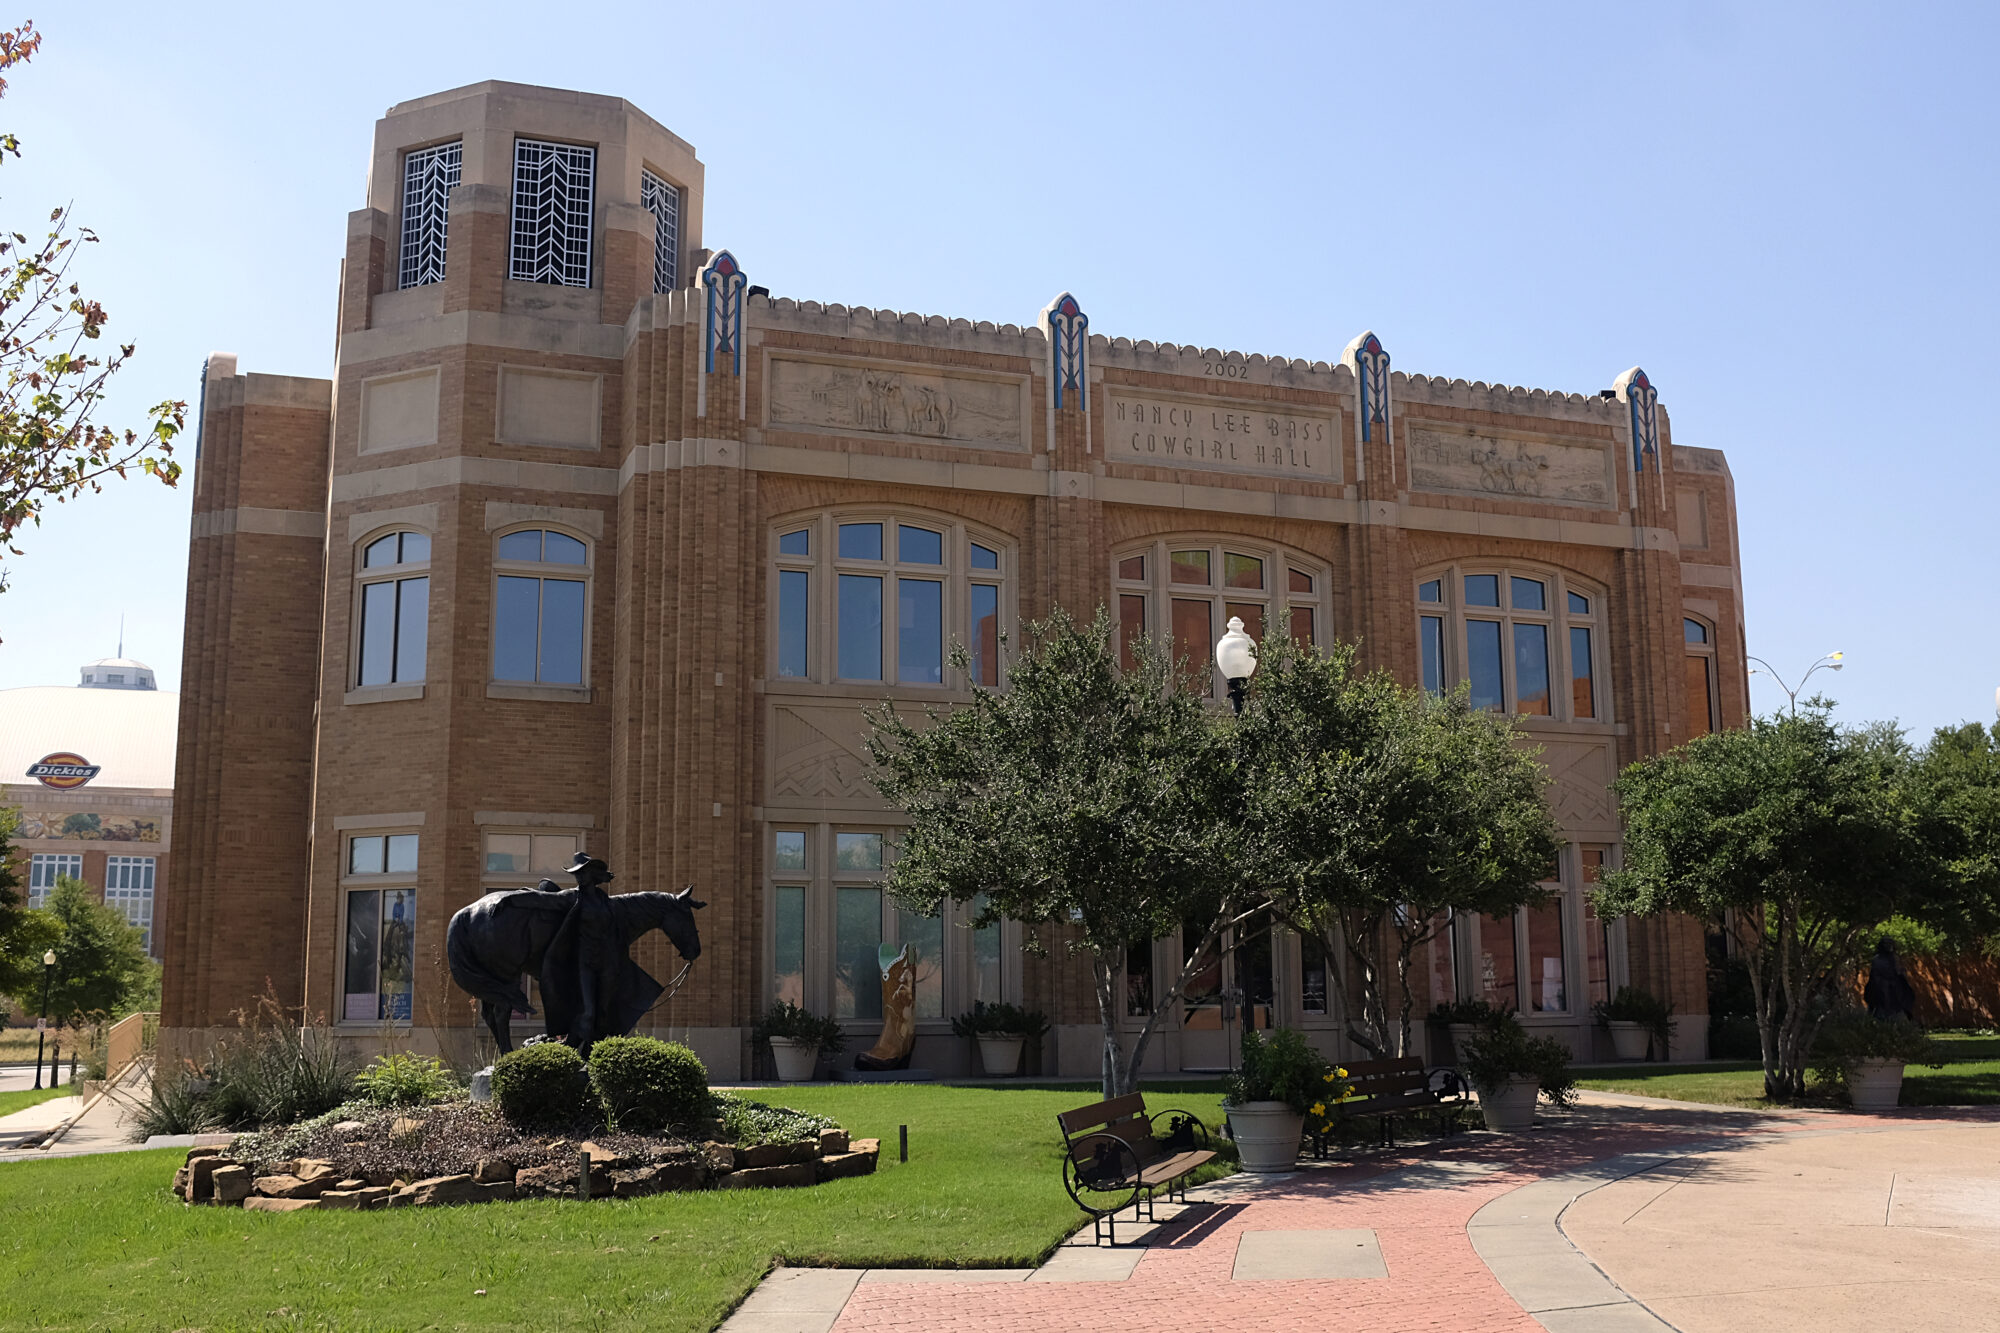 View of the National Cowgirl Museum and Hall of Fame from outside